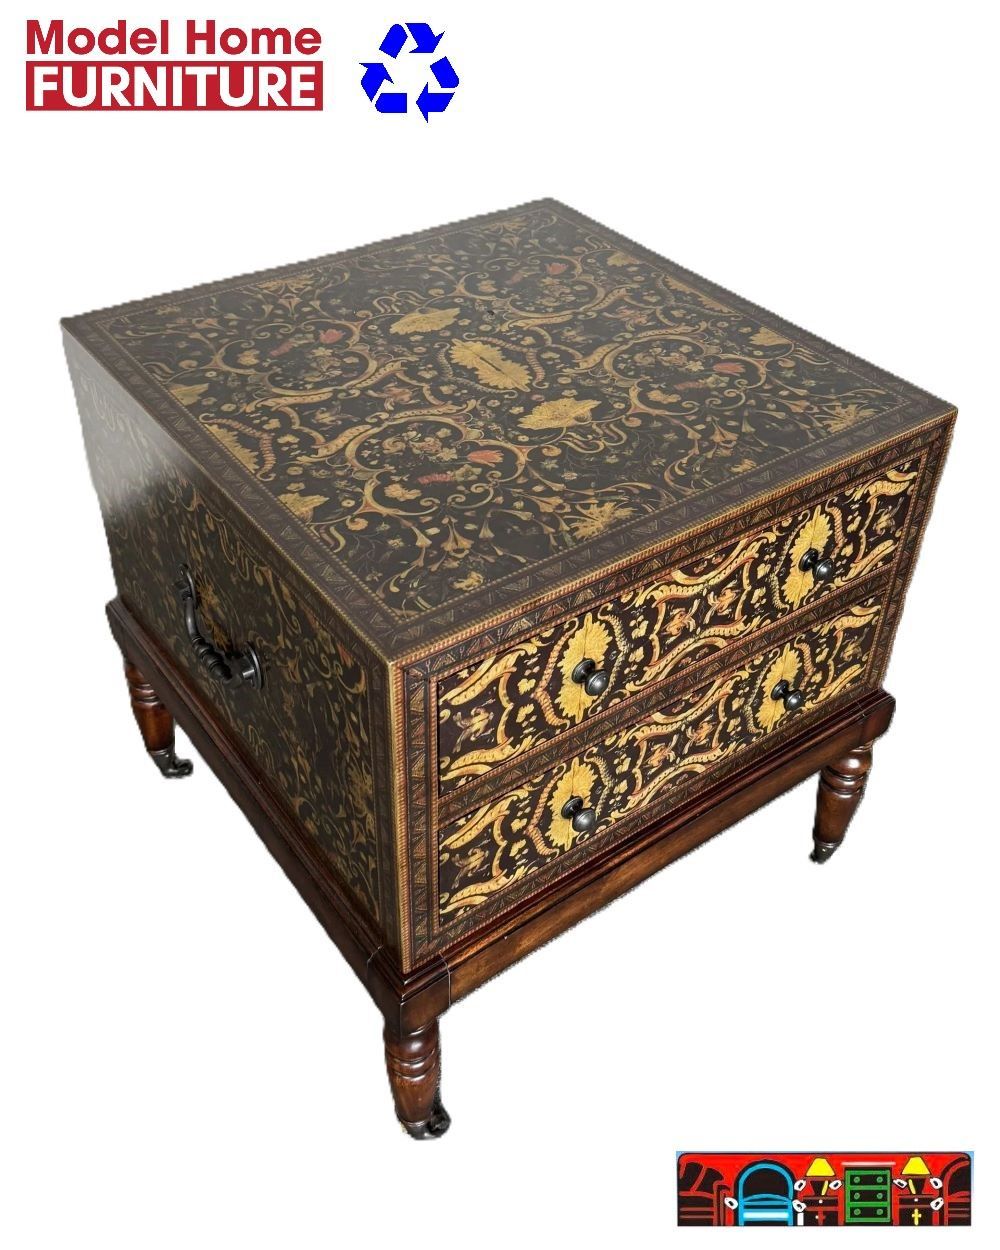 The Theodore Alexander hand-painted trunk end table features a brown background with an intricate design and is available at Bratz-CFW in Fort Myers, FL.